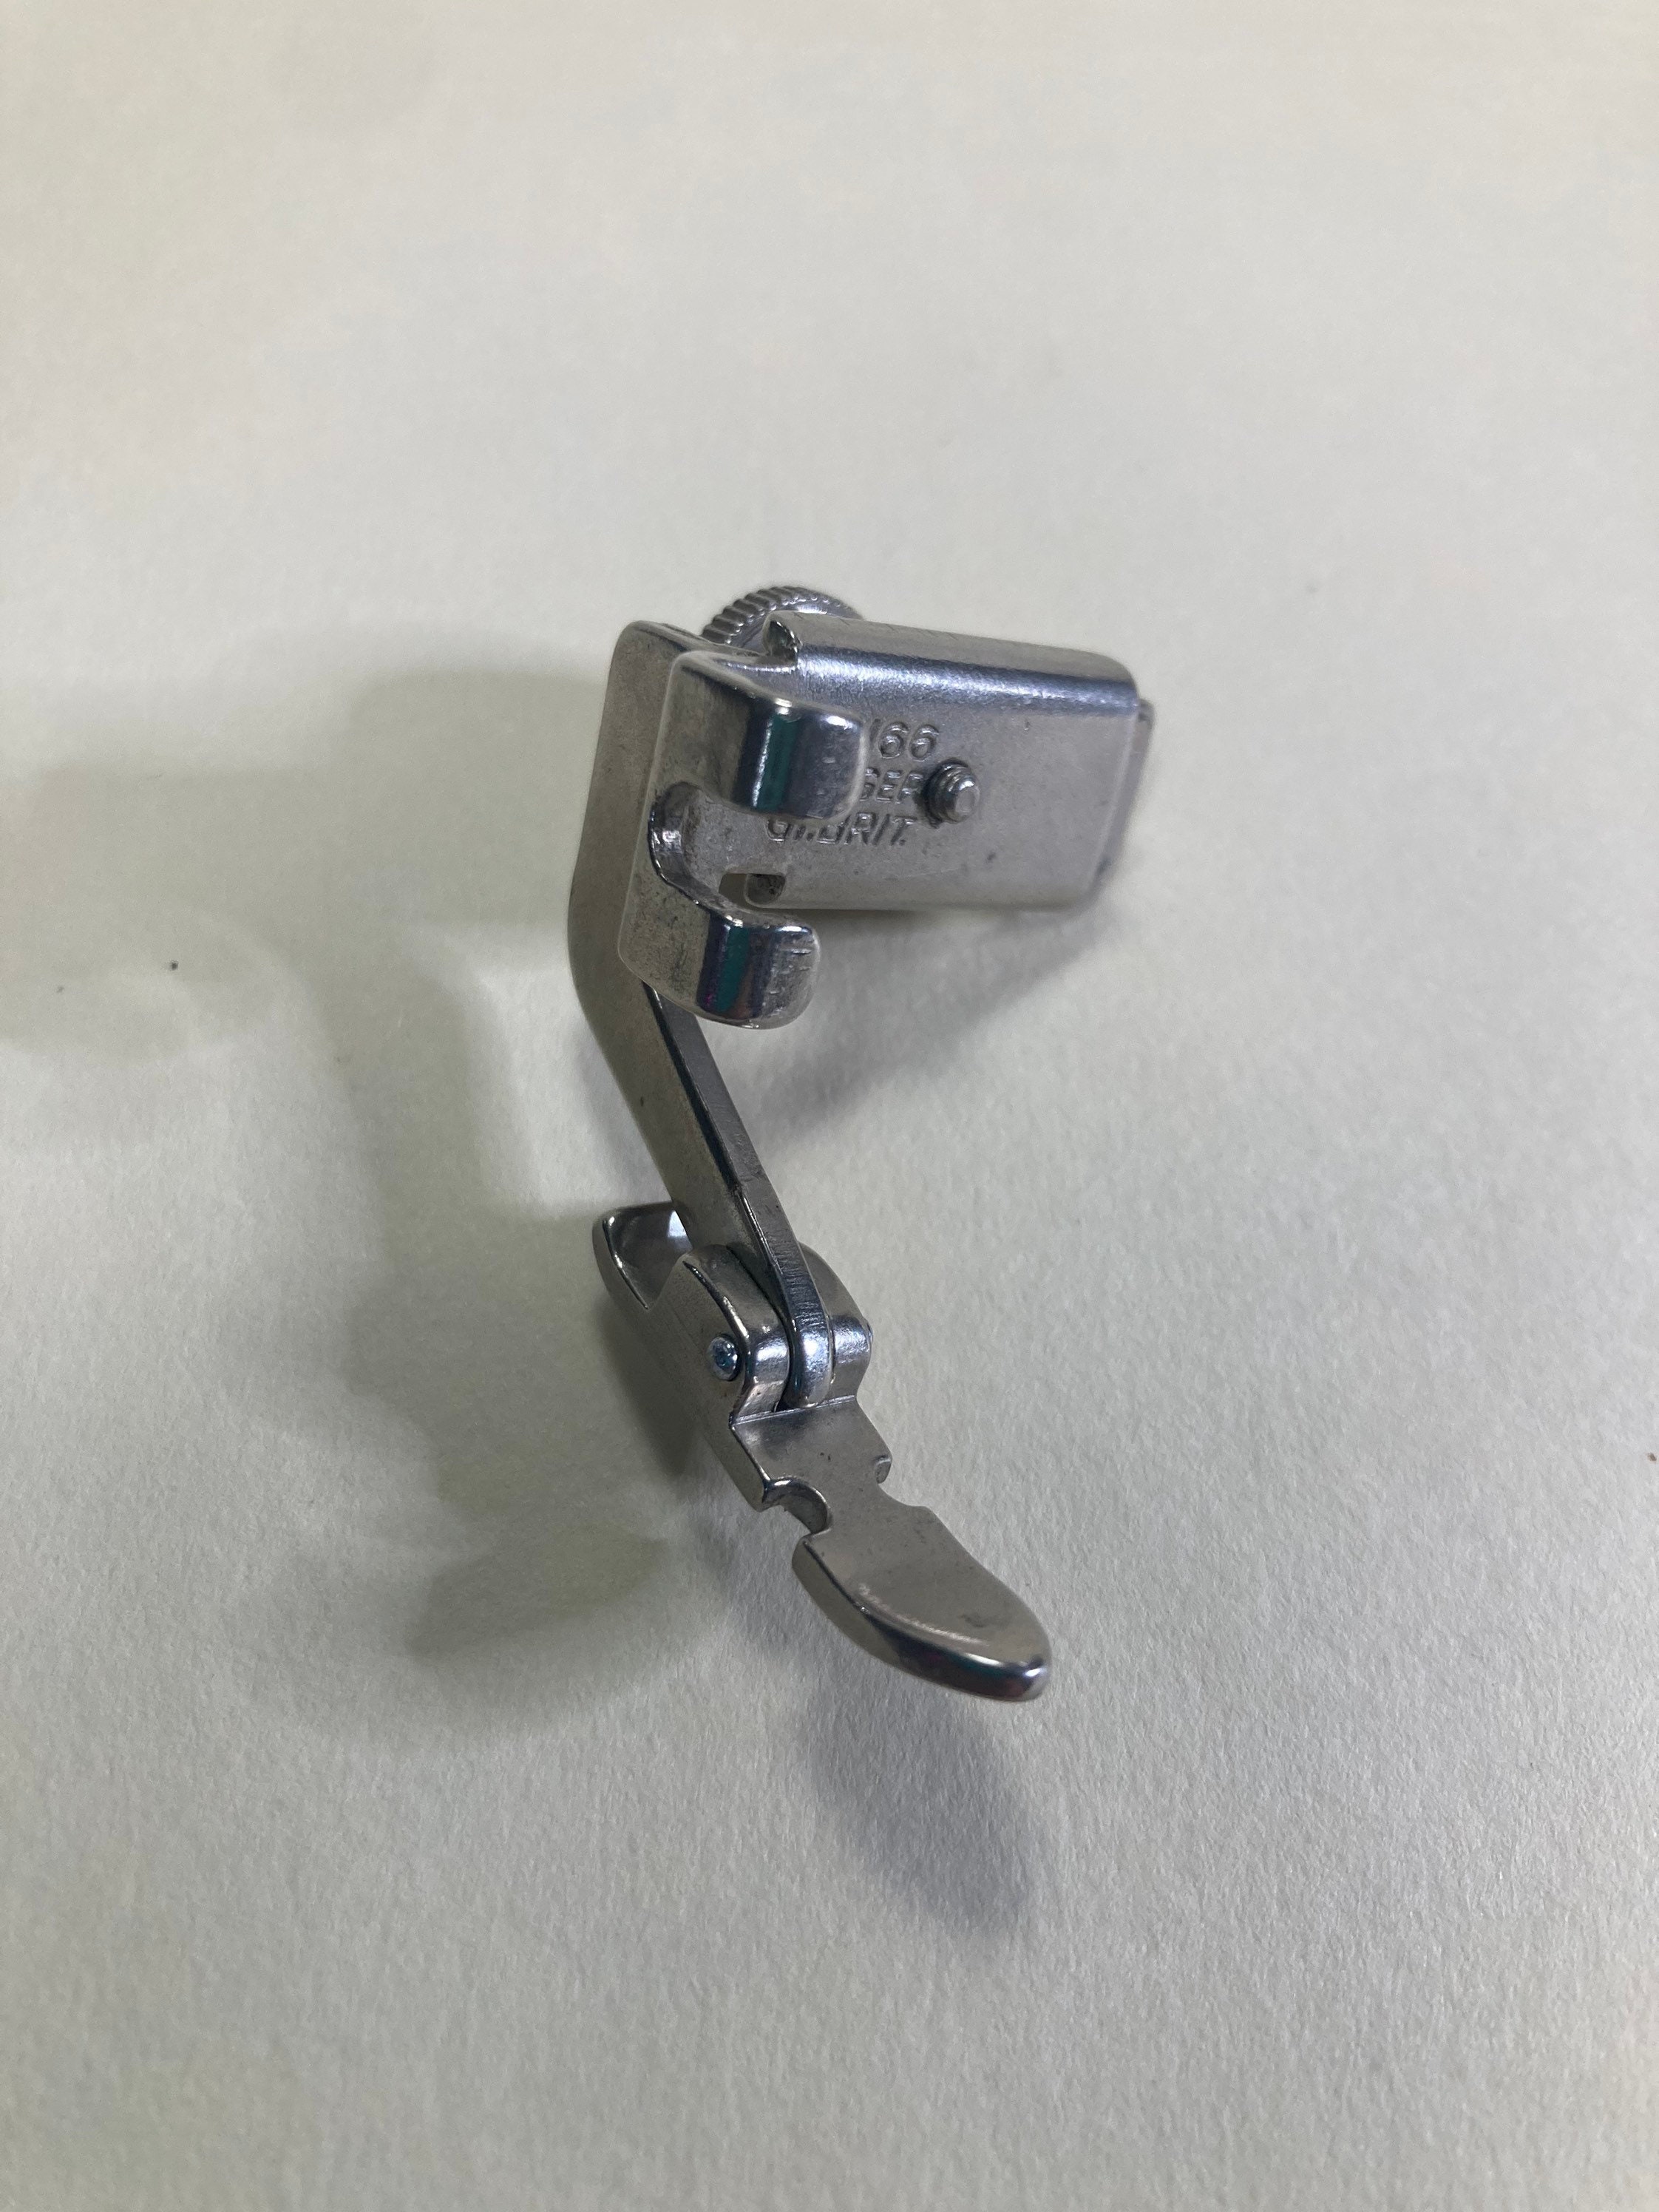 Singer Adjustable Zipper Foot 121877 Low Shank Side Clamp Attachment for  Model 15, 66, 99, 128, 201, and 221 Featherweight Sewing Machines 